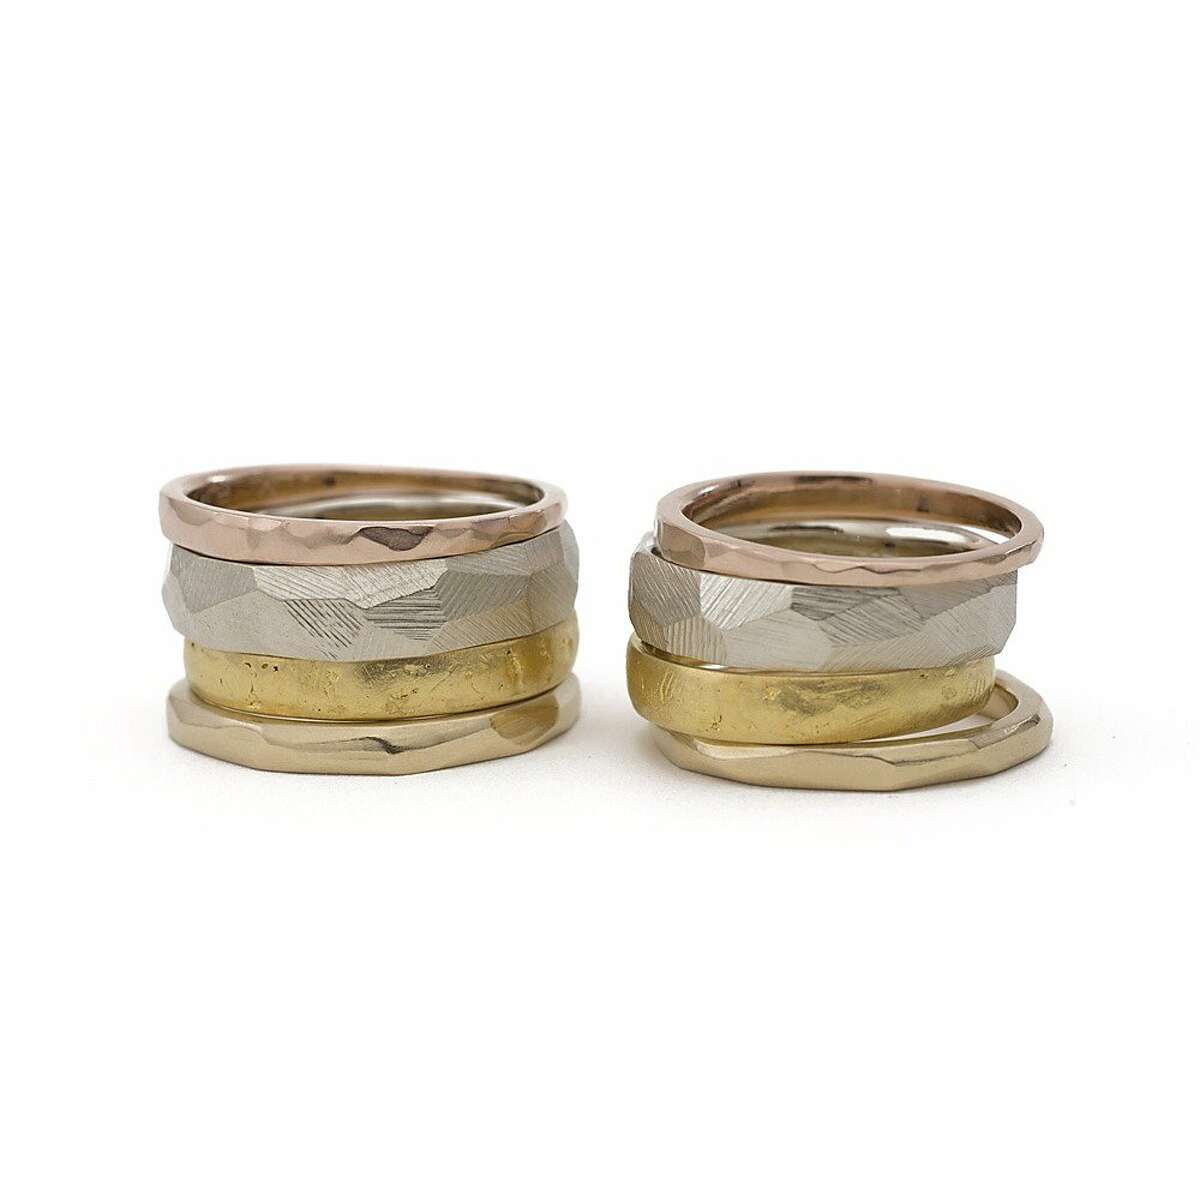 “KR-stack”Custom wedding bands by designer Kendra Renee. Adam Neeley hosts a Designer Trio Benefit trunk show featuring jewelry by Kendra Renee, Isabelle Posillico, and Genevieve Yang on Sat. July 11 from 2 p.m.-5 p.m. at 2030 Union St., Suite A, S.F.